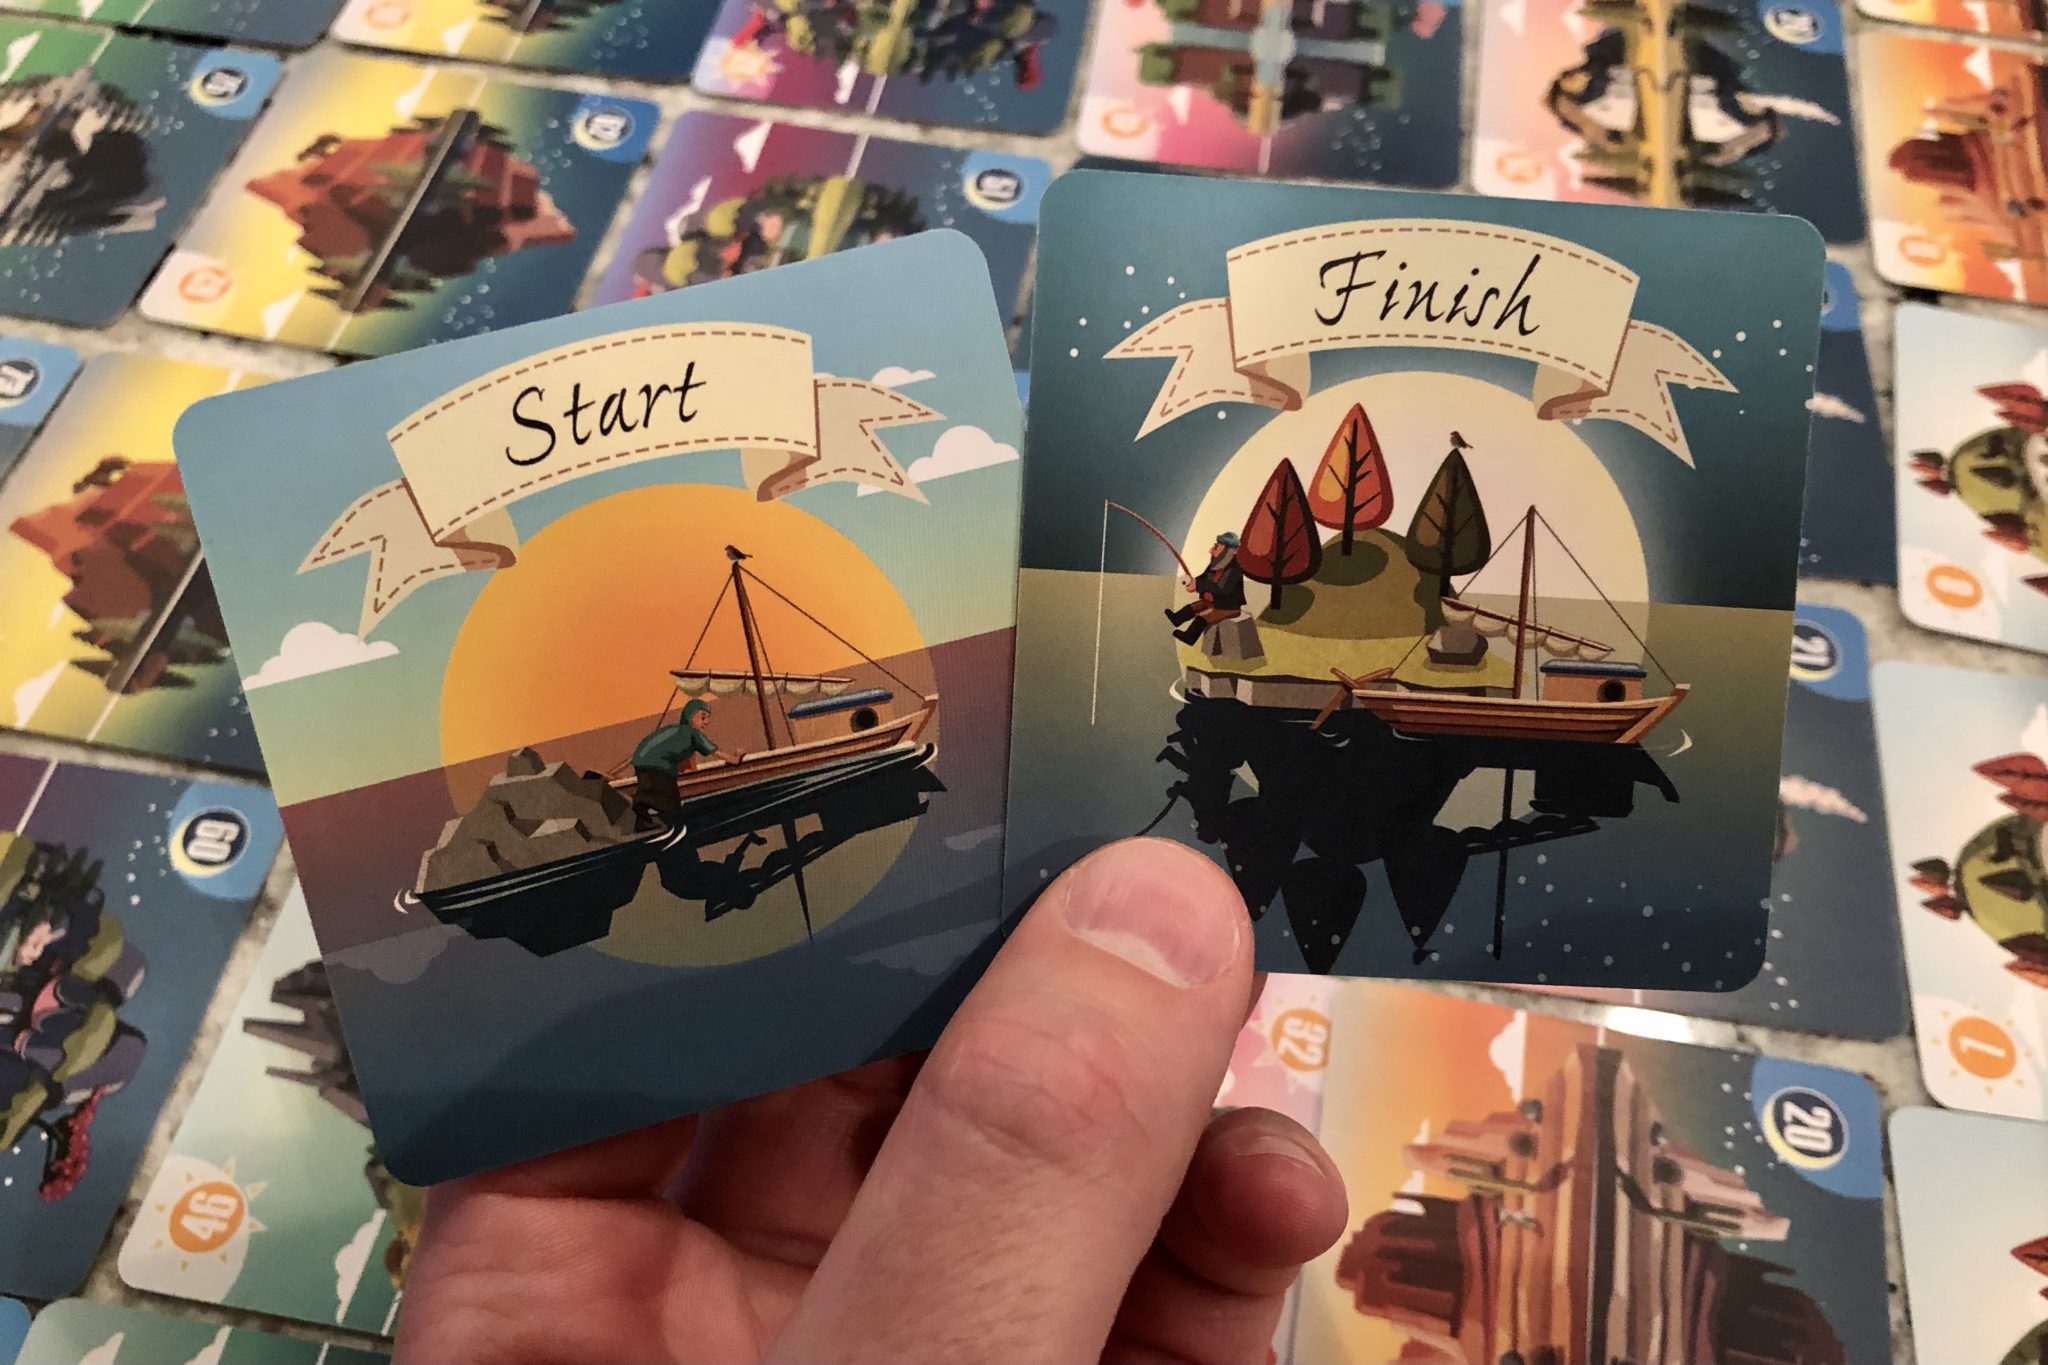 Tranquility start and finish cards